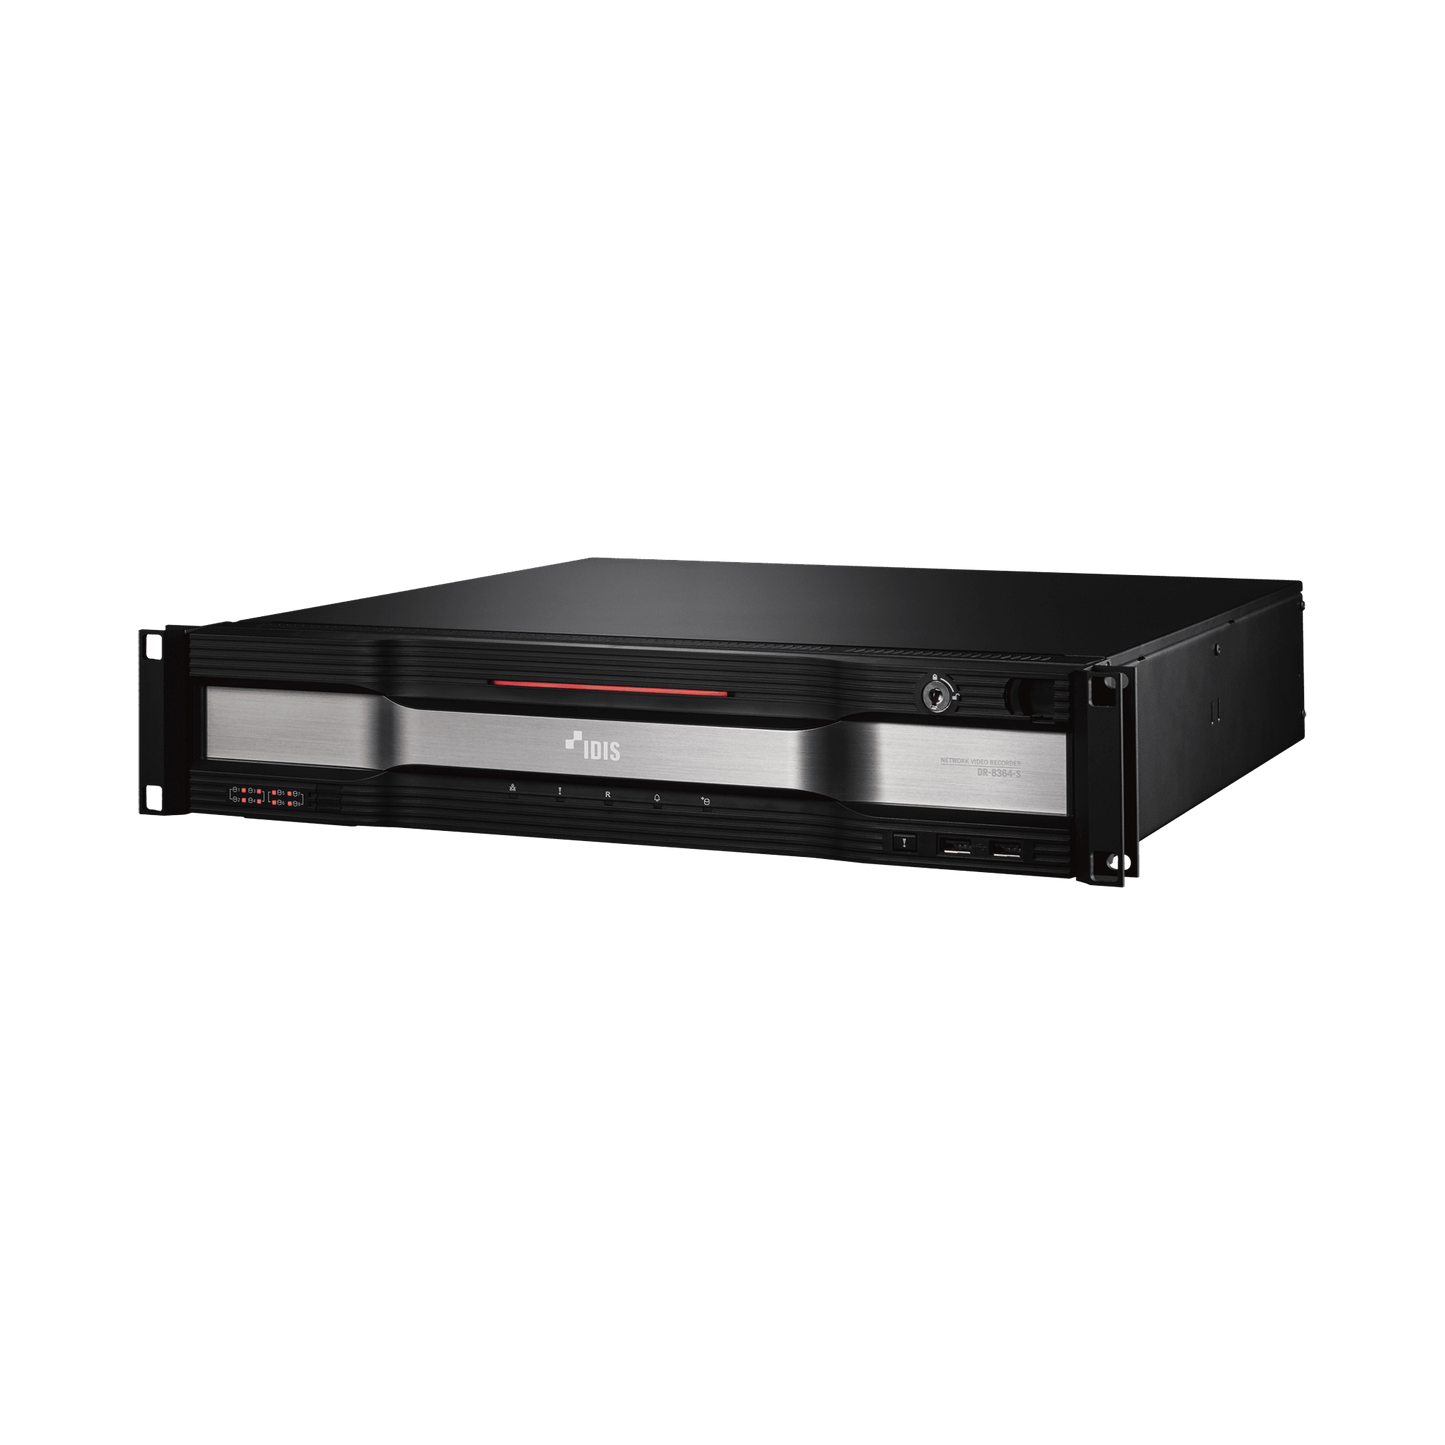 DirectIP 8400 Series H.265 4K Recorder, Throughput 320Mbps, up to 480IPS UHD Real-Time Recording